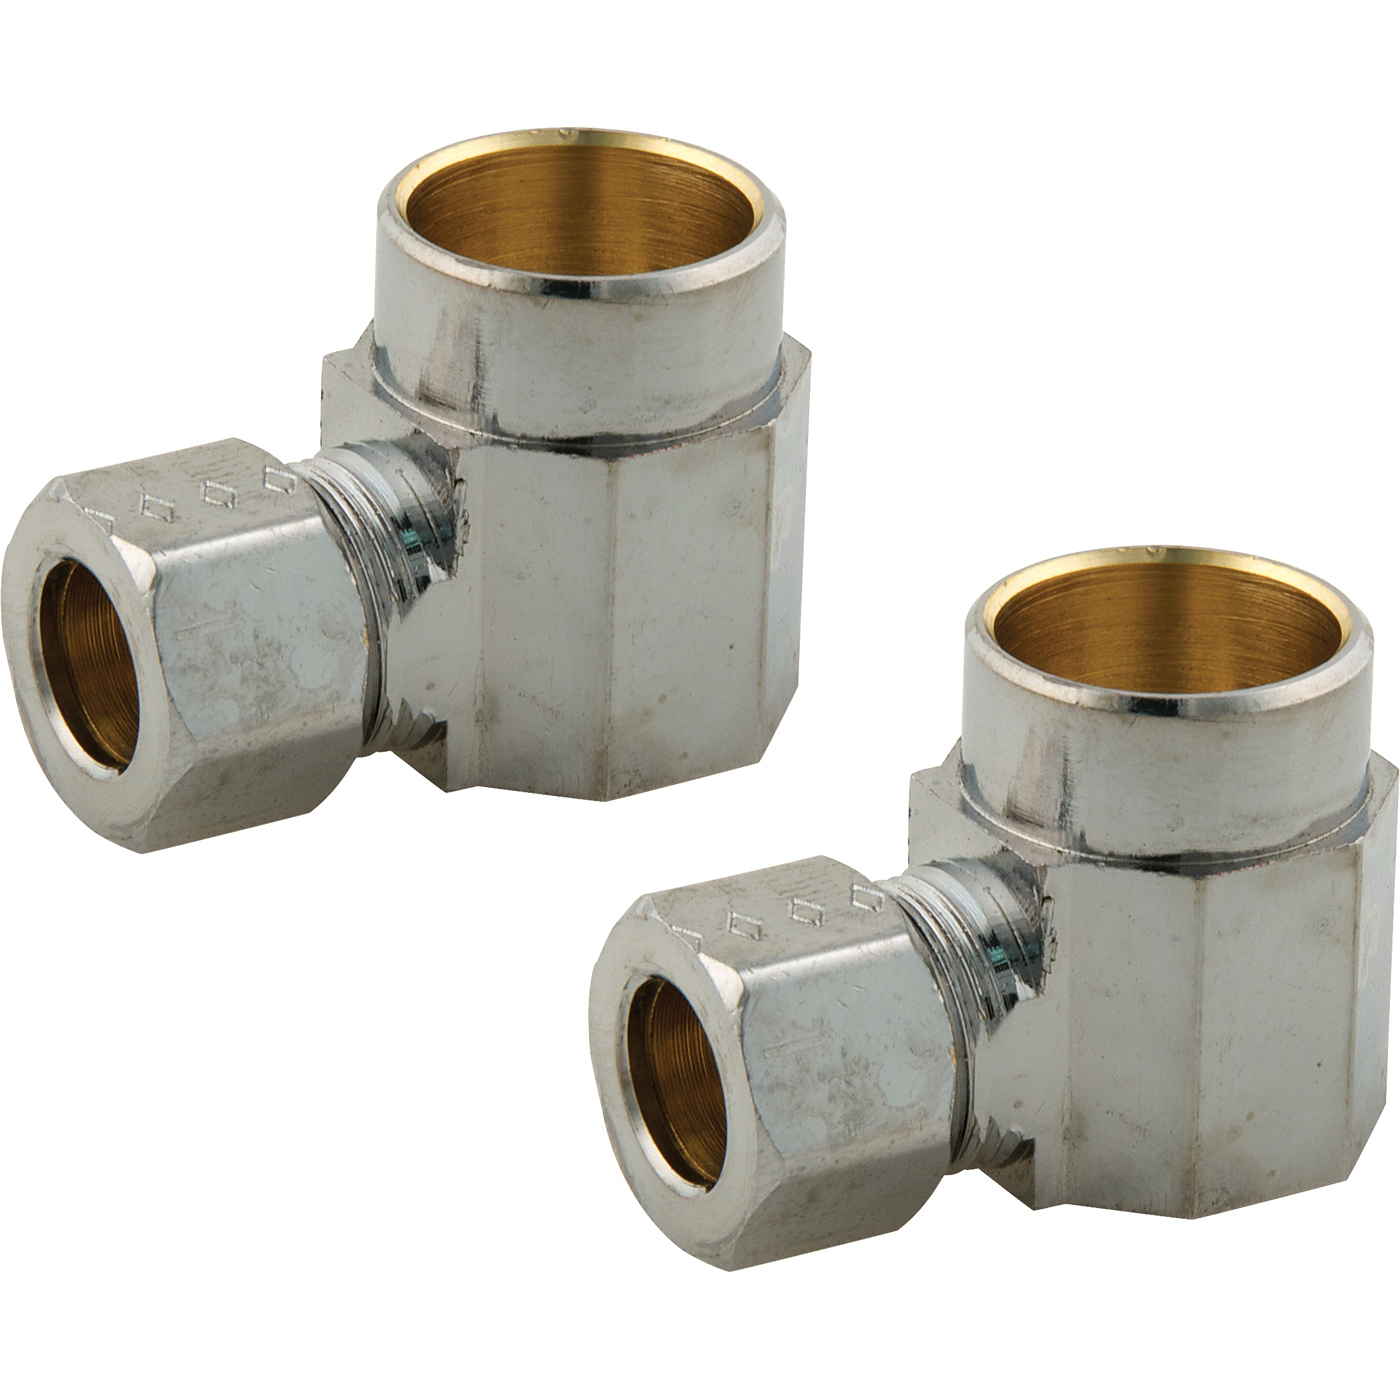 Compression fitting - Sweat reducing elbows - Master Plumber®